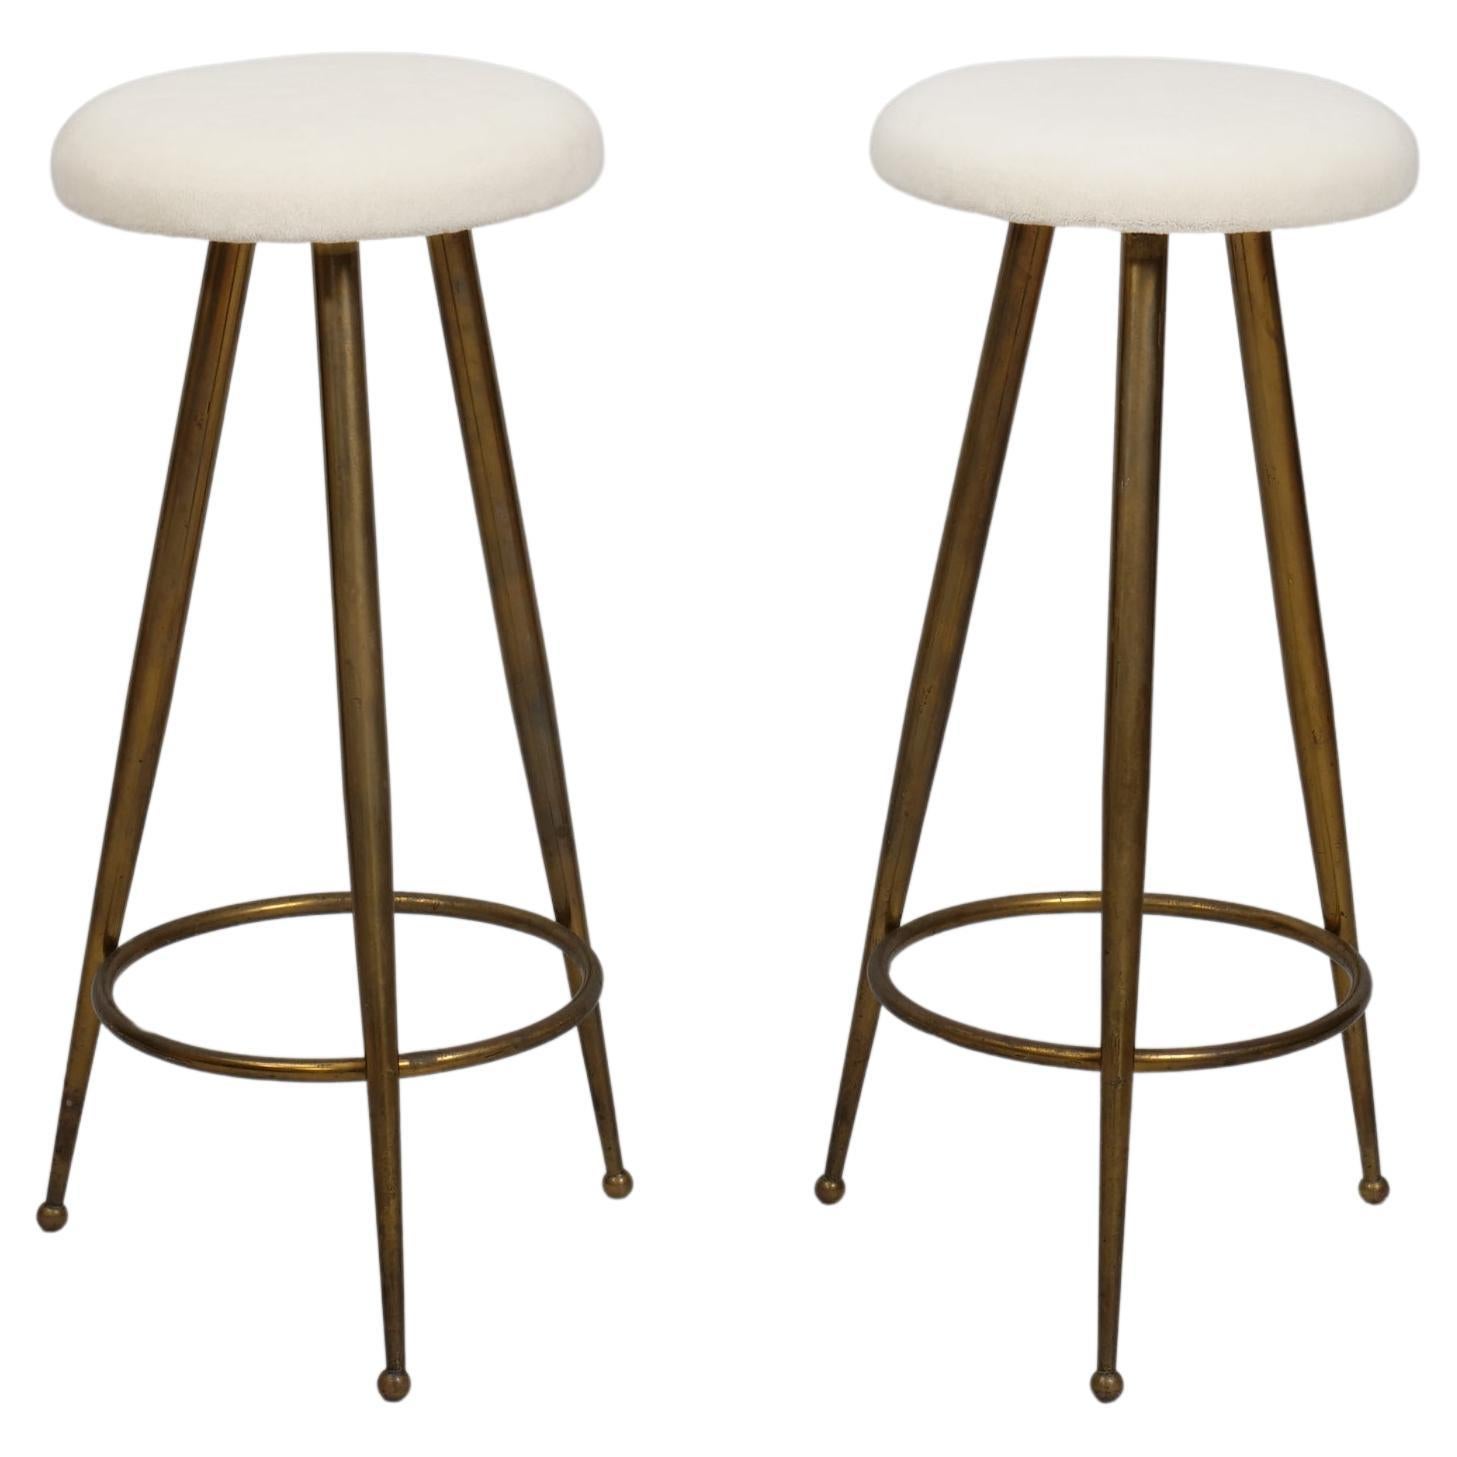 Pair brass bar stools by Gio Ponti. Italy c1950

Re upholstered in off white alpaca velvet which contrasts nicely with the brass patina
